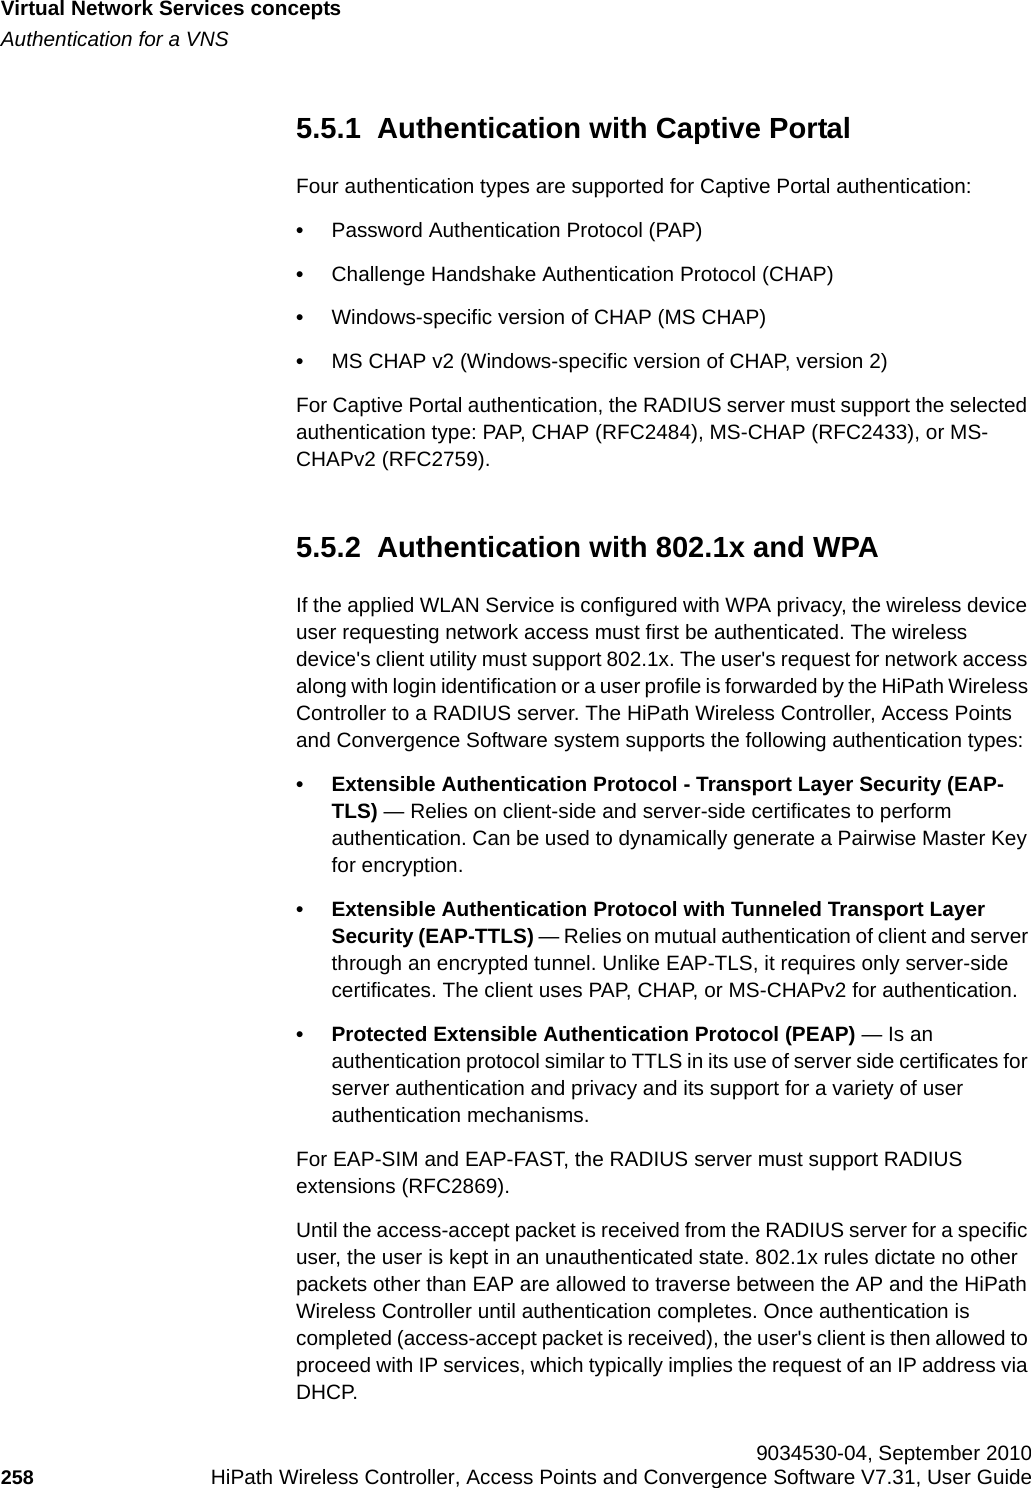 Virtual Network Services conceptshwc_vnsintro.fmAuthentication for a VNS 9034530-04, September 2010258 HiPath Wireless Controller, Access Points and Convergence Software V7.31, User Guide        5.5.1  Authentication with Captive PortalFour authentication types are supported for Captive Portal authentication:•Password Authentication Protocol (PAP)•Challenge Handshake Authentication Protocol (CHAP)•Windows-specific version of CHAP (MS CHAP)•MS CHAP v2 (Windows-specific version of CHAP, version 2)For Captive Portal authentication, the RADIUS server must support the selected authentication type: PAP, CHAP (RFC2484), MS-CHAP (RFC2433), or MS-CHAPv2 (RFC2759).5.5.2  Authentication with 802.1x and WPAIf the applied WLAN Service is configured with WPA privacy, the wireless device user requesting network access must first be authenticated. The wireless device&apos;s client utility must support 802.1x. The user&apos;s request for network access along with login identification or a user profile is forwarded by the HiPath Wireless Controller to a RADIUS server. The HiPath Wireless Controller, Access Points and Convergence Software system supports the following authentication types:• Extensible Authentication Protocol - Transport Layer Security (EAP-TLS) — Relies on client-side and server-side certificates to perform authentication. Can be used to dynamically generate a Pairwise Master Key for encryption.• Extensible Authentication Protocol with Tunneled Transport Layer Security (EAP-TTLS) — Relies on mutual authentication of client and server through an encrypted tunnel. Unlike EAP-TLS, it requires only server-side certificates. The client uses PAP, CHAP, or MS-CHAPv2 for authentication.• Protected Extensible Authentication Protocol (PEAP) — Is an authentication protocol similar to TTLS in its use of server side certificates for server authentication and privacy and its support for a variety of user authentication mechanisms.For EAP-SIM and EAP-FAST, the RADIUS server must support RADIUS extensions (RFC2869).Until the access-accept packet is received from the RADIUS server for a specific user, the user is kept in an unauthenticated state. 802.1x rules dictate no other packets other than EAP are allowed to traverse between the AP and the HiPath Wireless Controller until authentication completes. Once authentication is completed (access-accept packet is received), the user&apos;s client is then allowed to proceed with IP services, which typically implies the request of an IP address via DHCP. 